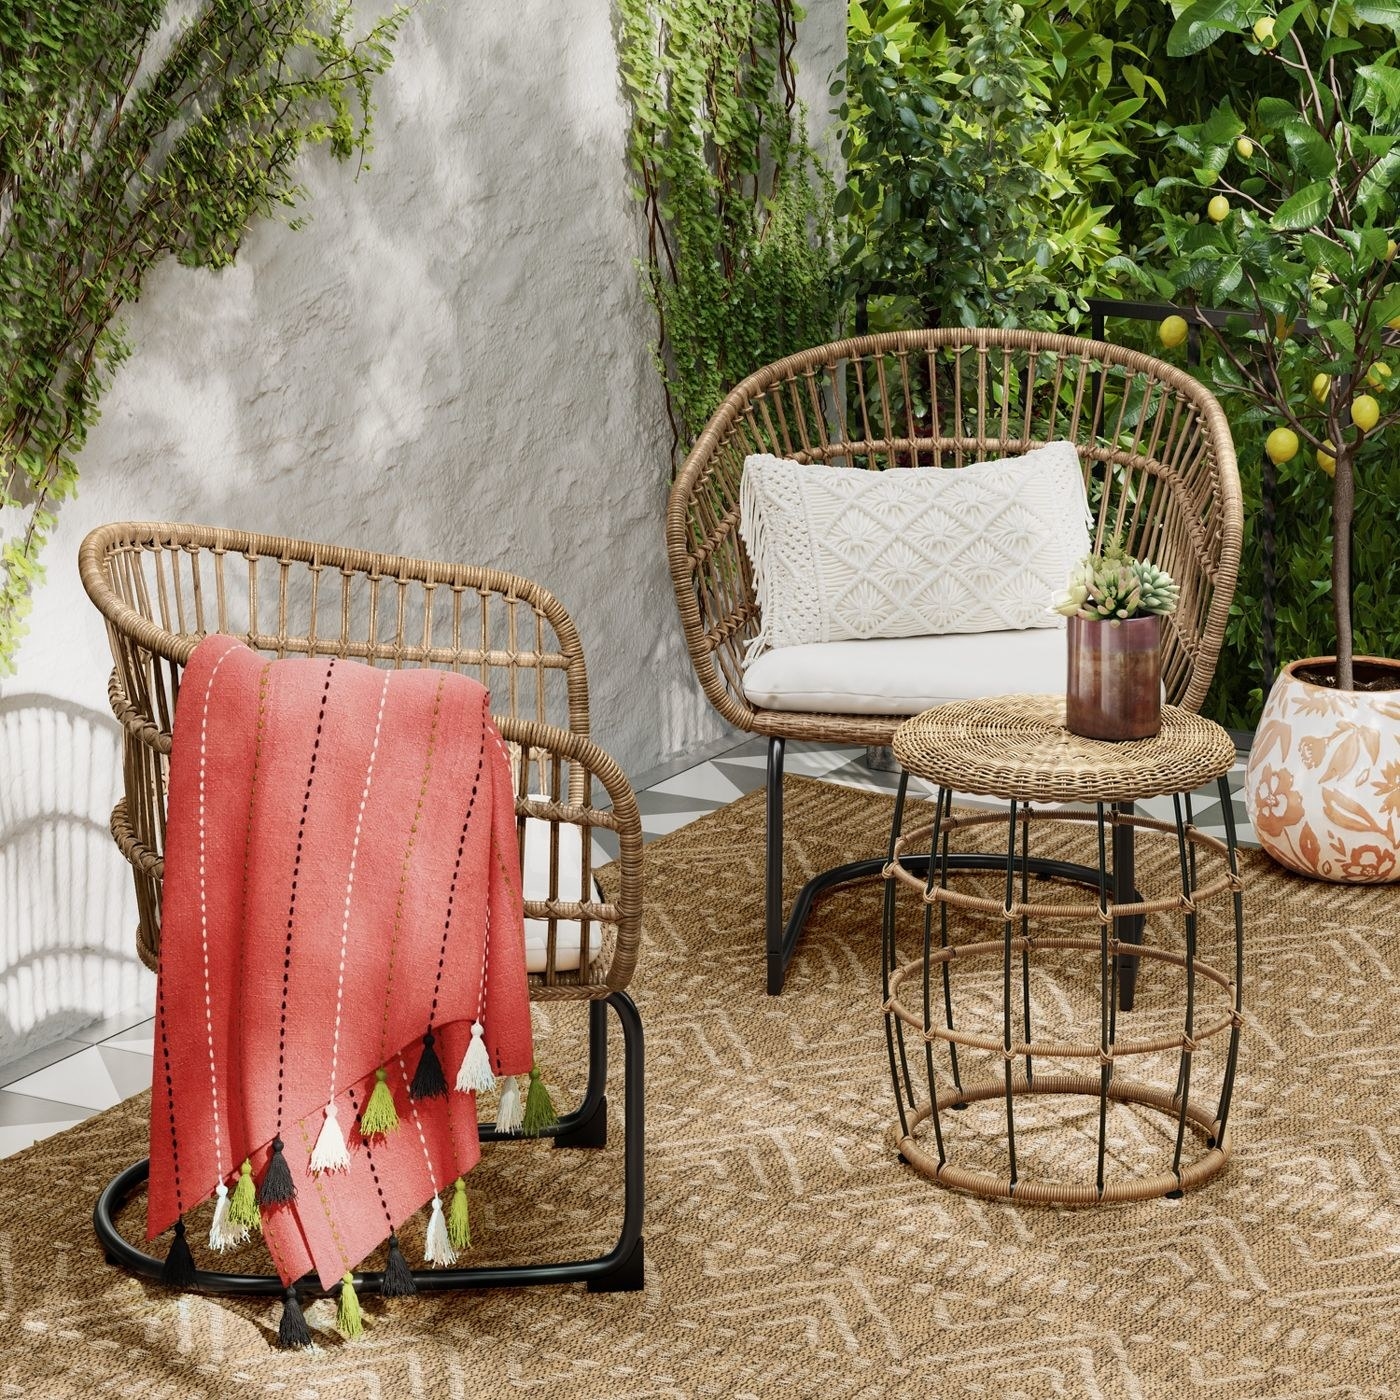 The woven conversation set on a patio